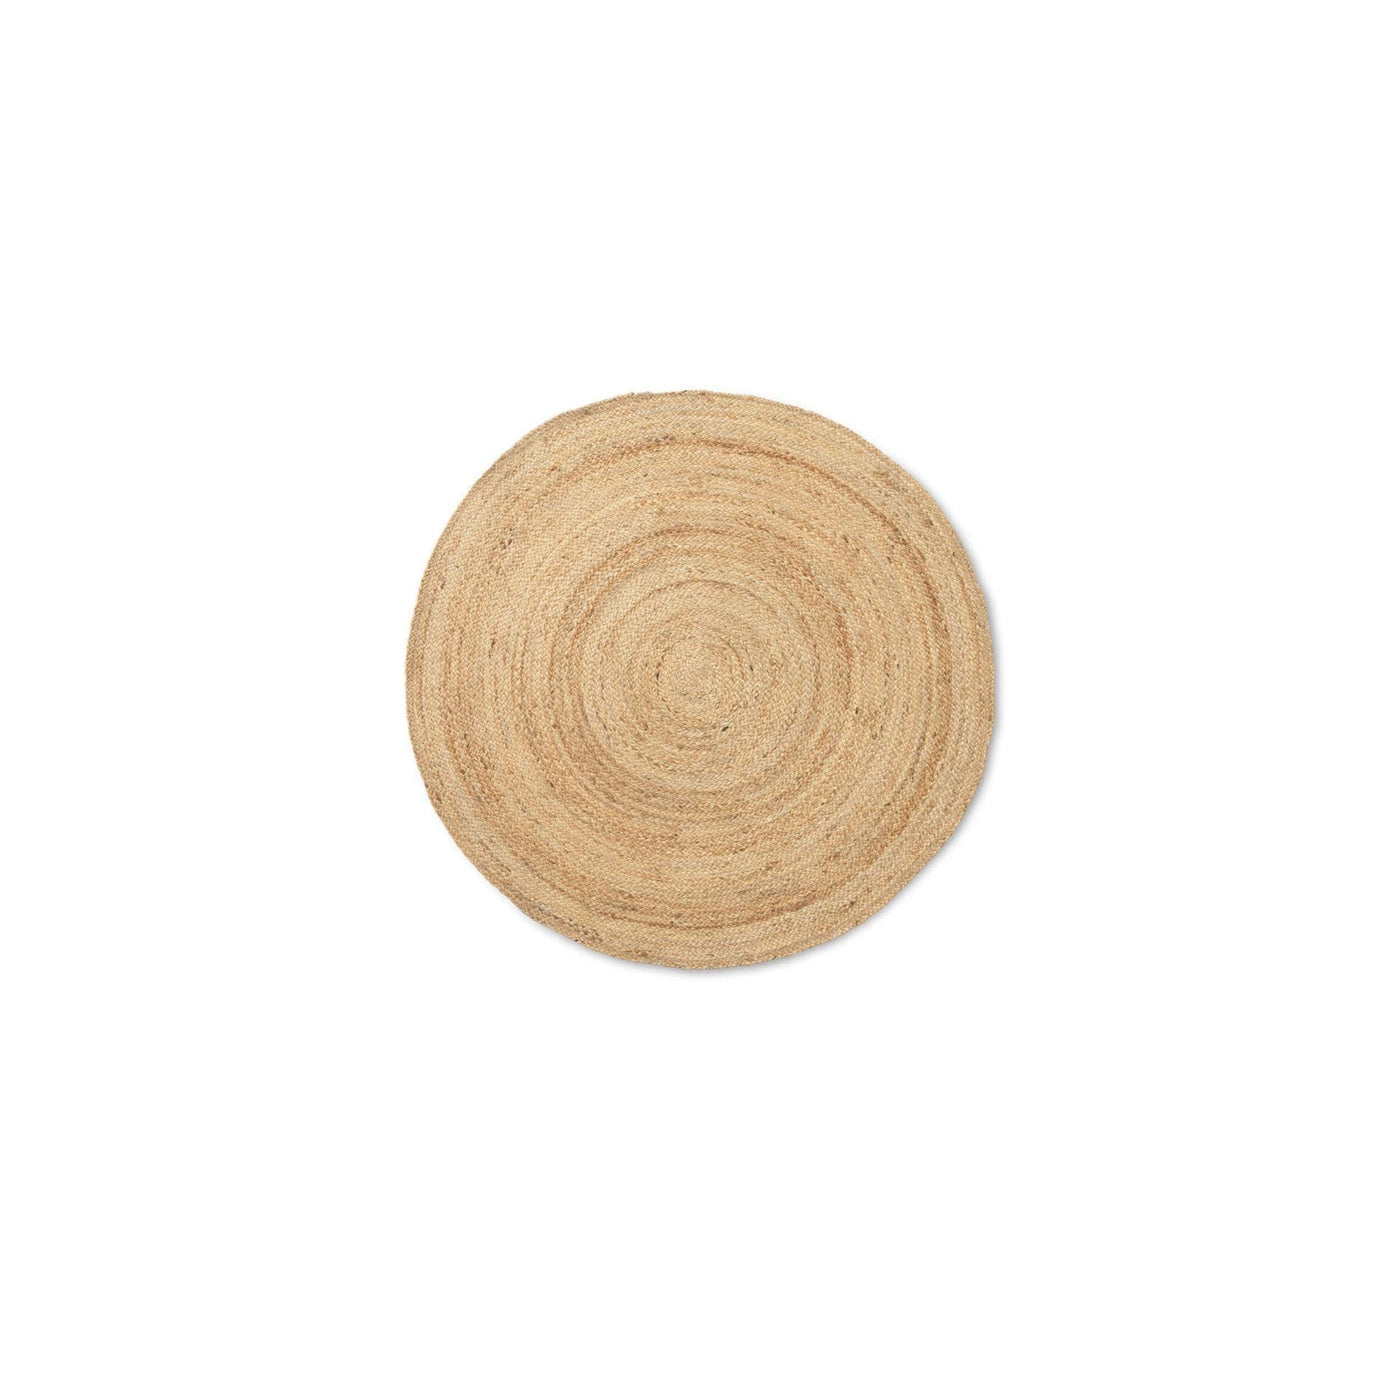 Ferm Living Eternal Jute Rug Round in natural. Available from someday designs. #colour_natural-jute